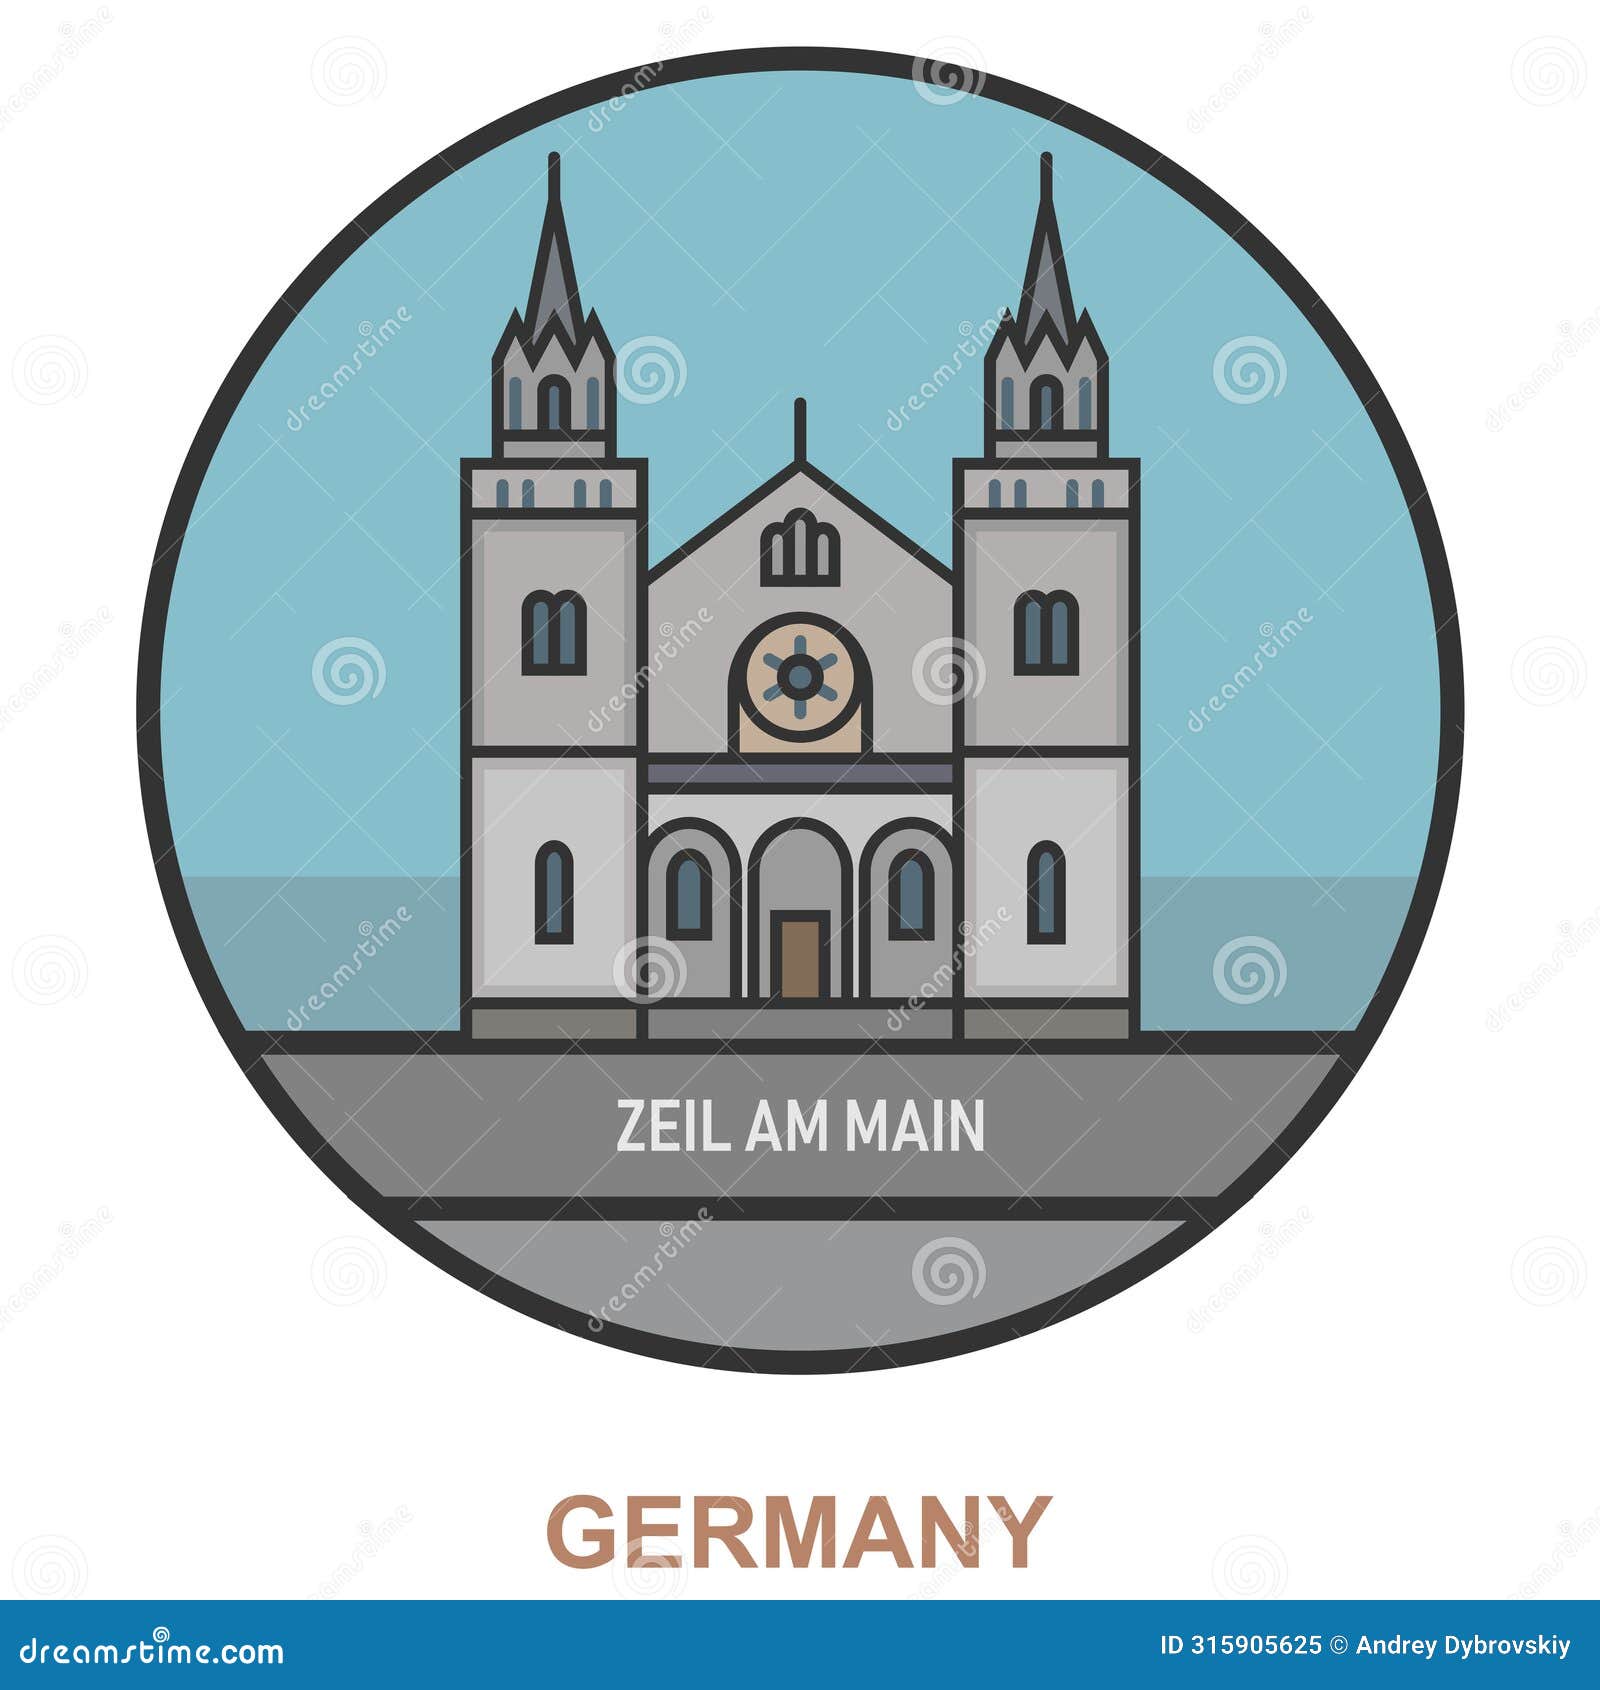 zeil am main. cities and towns in germany